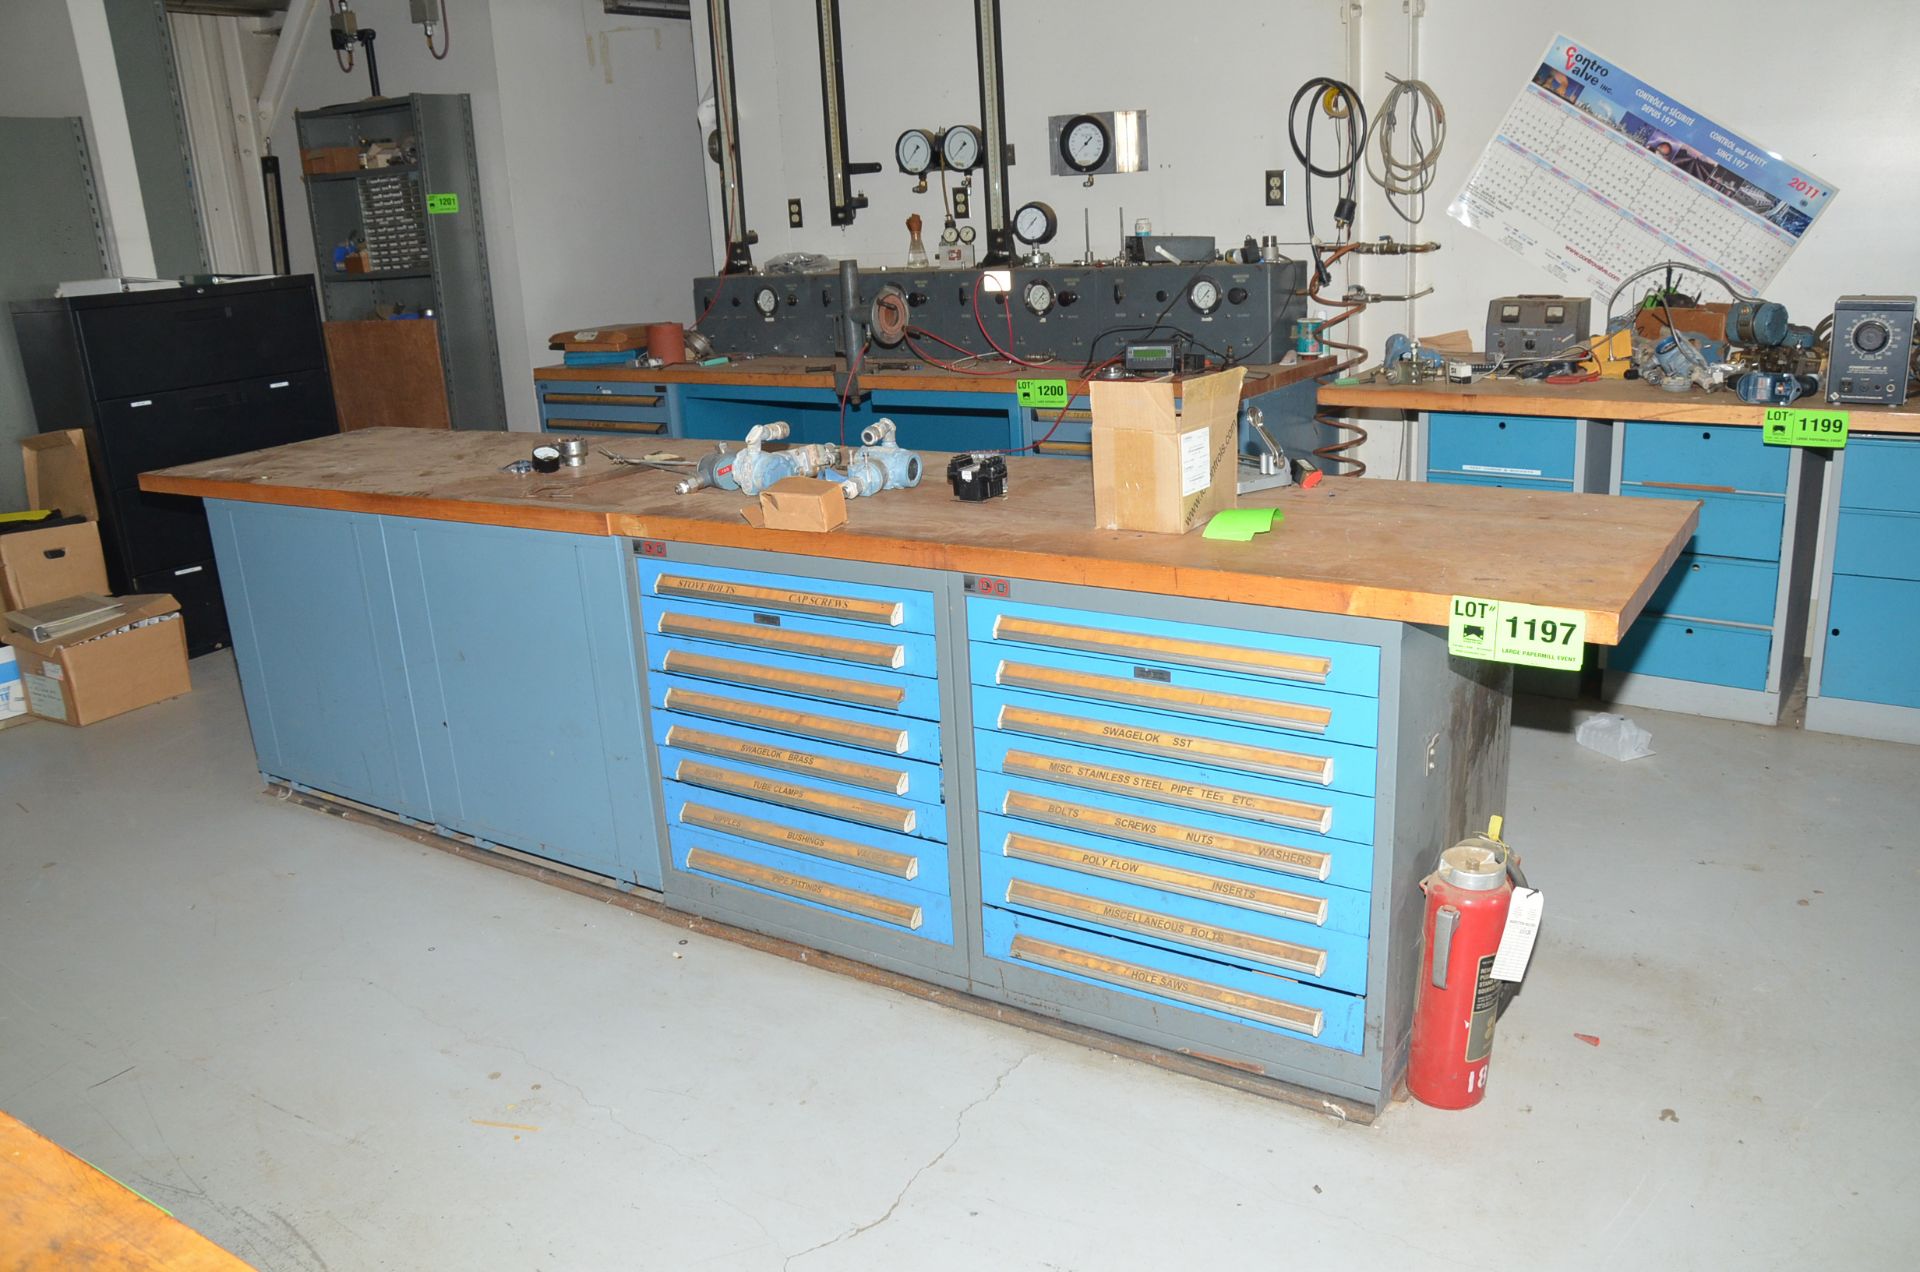 LOT/ ROUSSEAU BUTCHER BLOCK WORK BENCHES WITH CONTENTS [RIGGING FEES FOR LOT #1197 - $200 USD PLUS